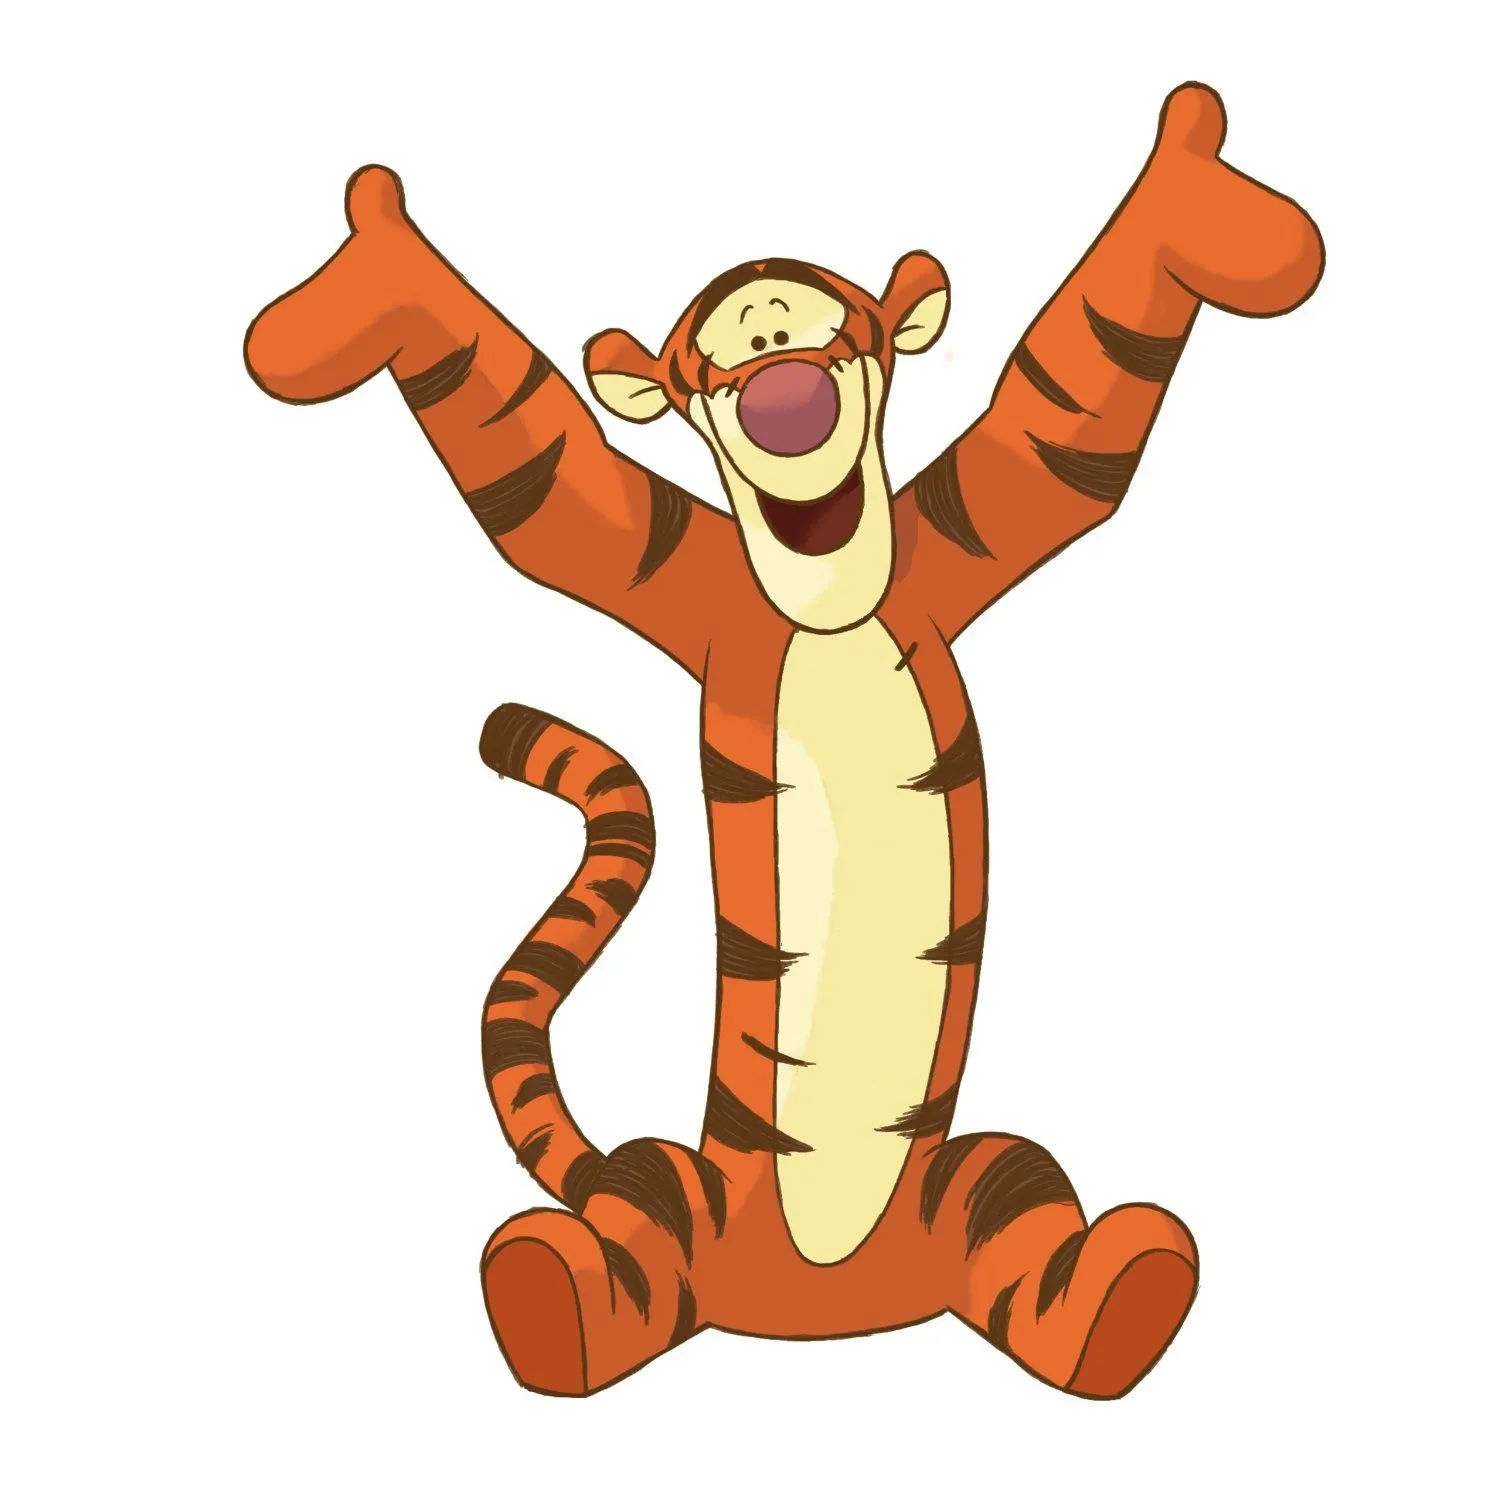 Wall Decals for Nursery Decorating: Tigger & Winnie the Pooh Re ...